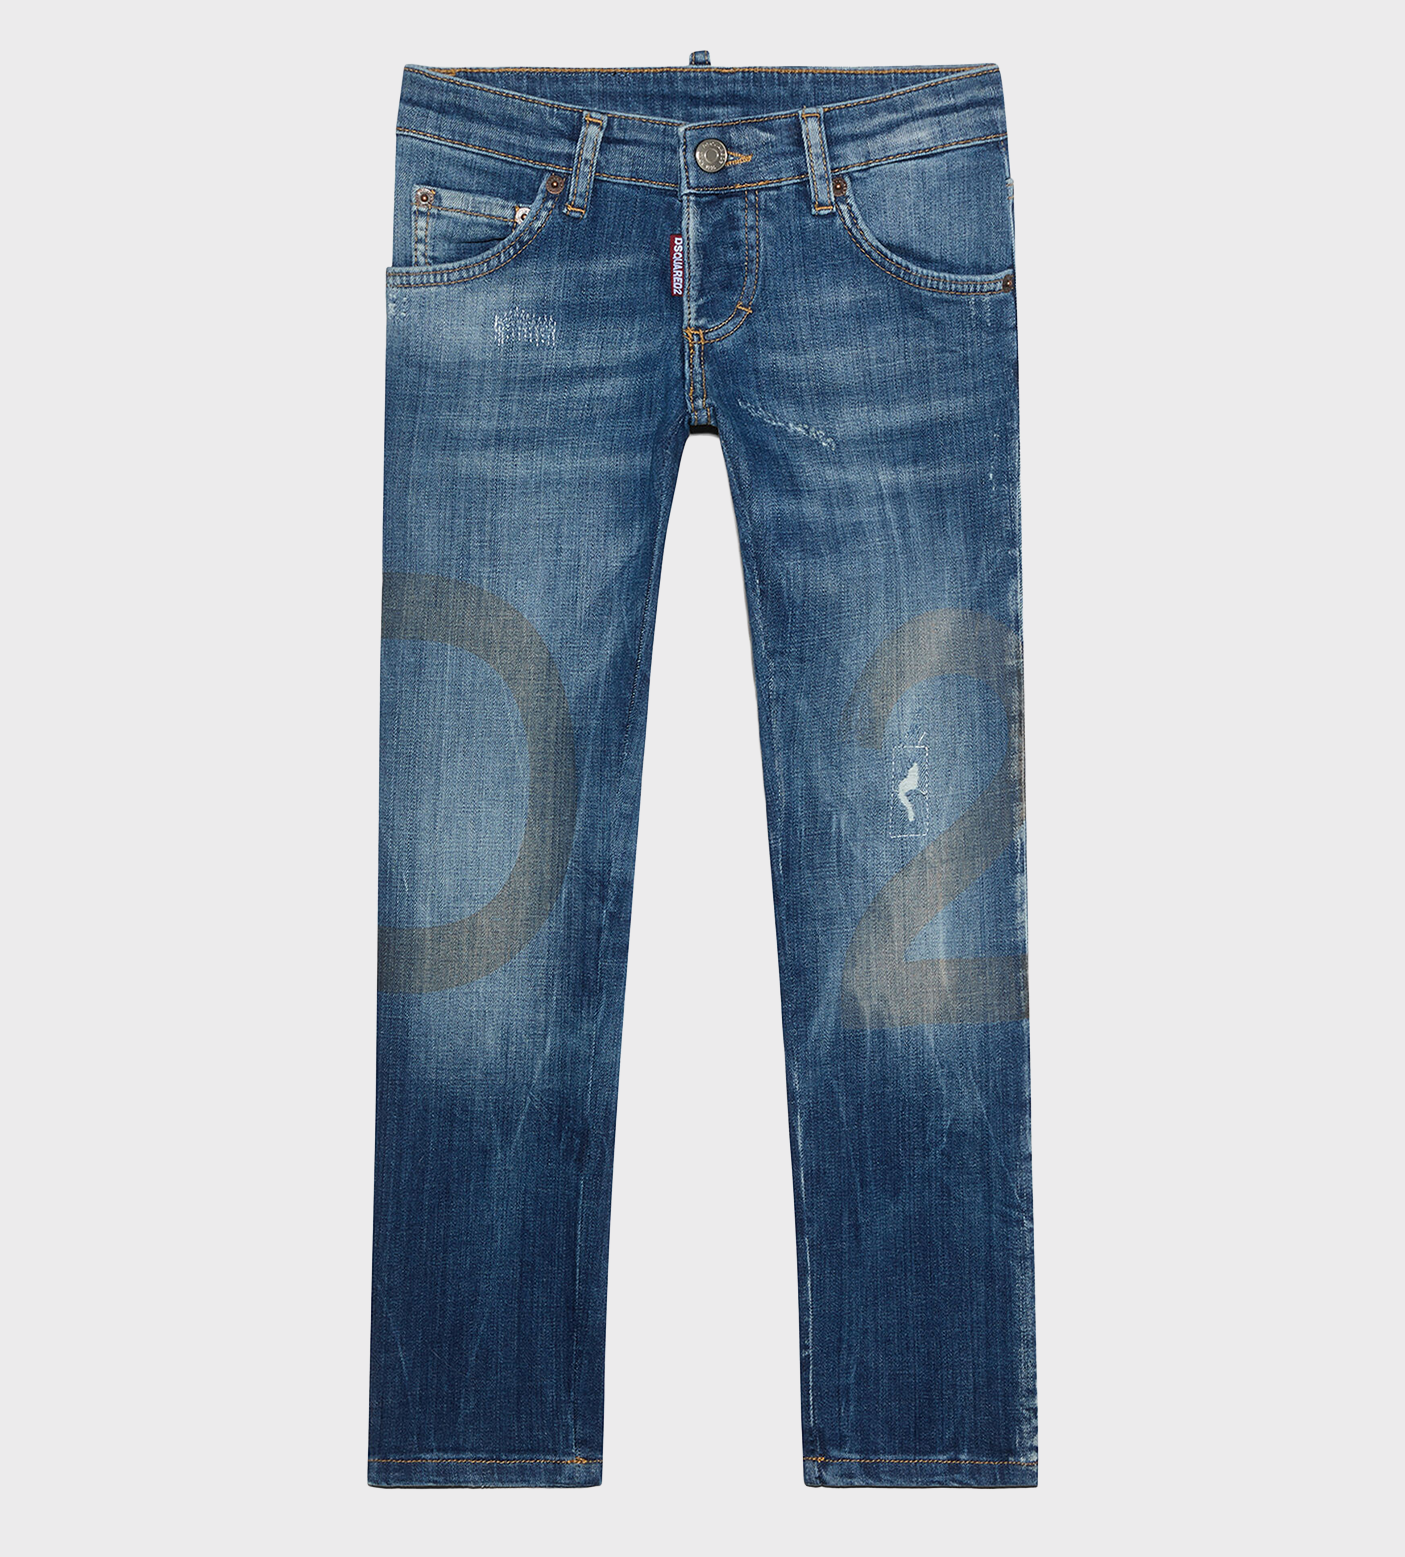 Cool Guy Distressed Skinny Jeans Blue